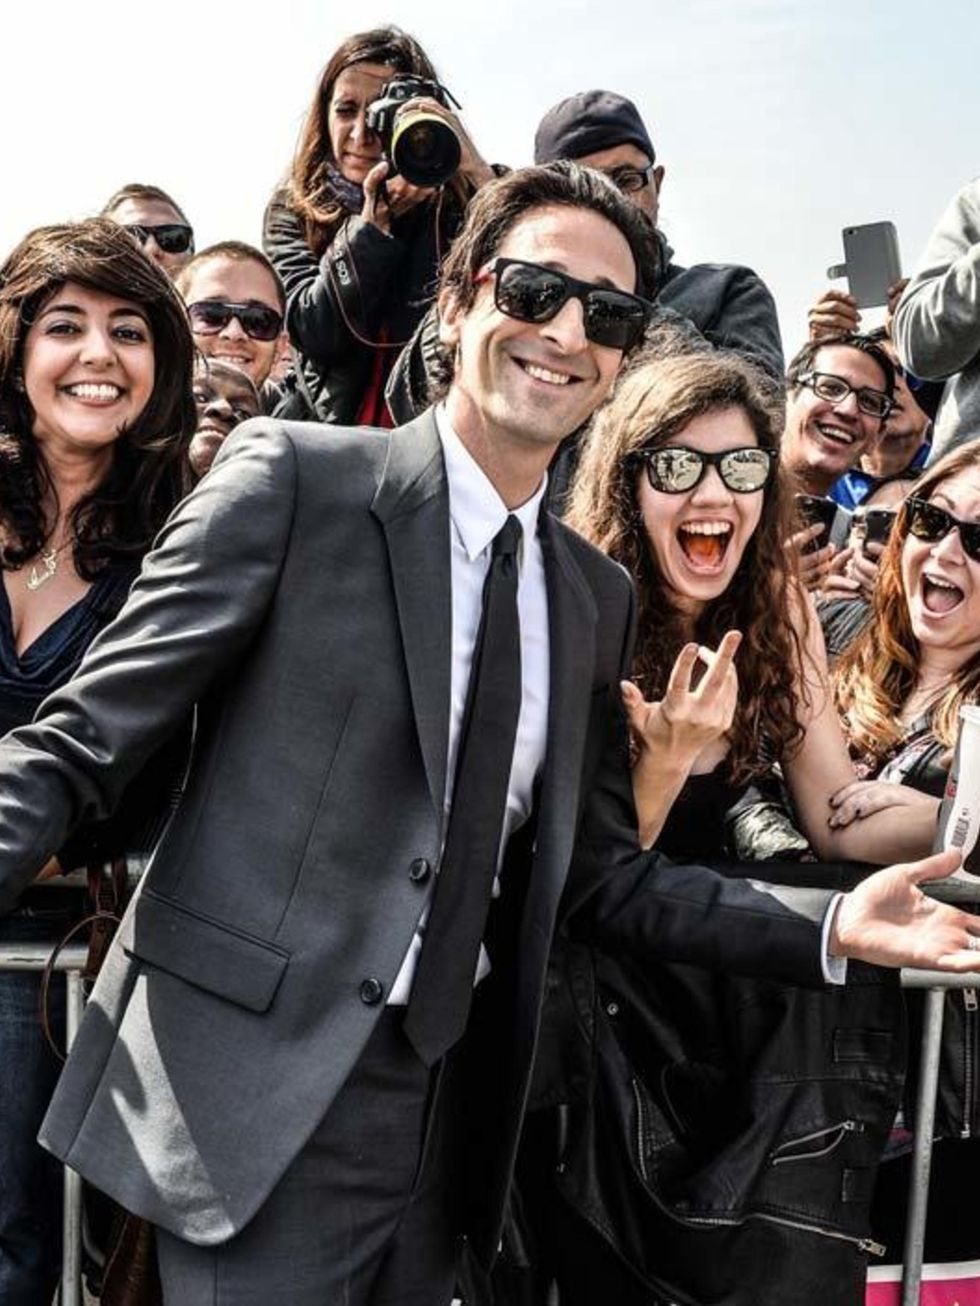 Adrian Brody at the 2015 Film Independent Spirit Awards in California, february 2015.